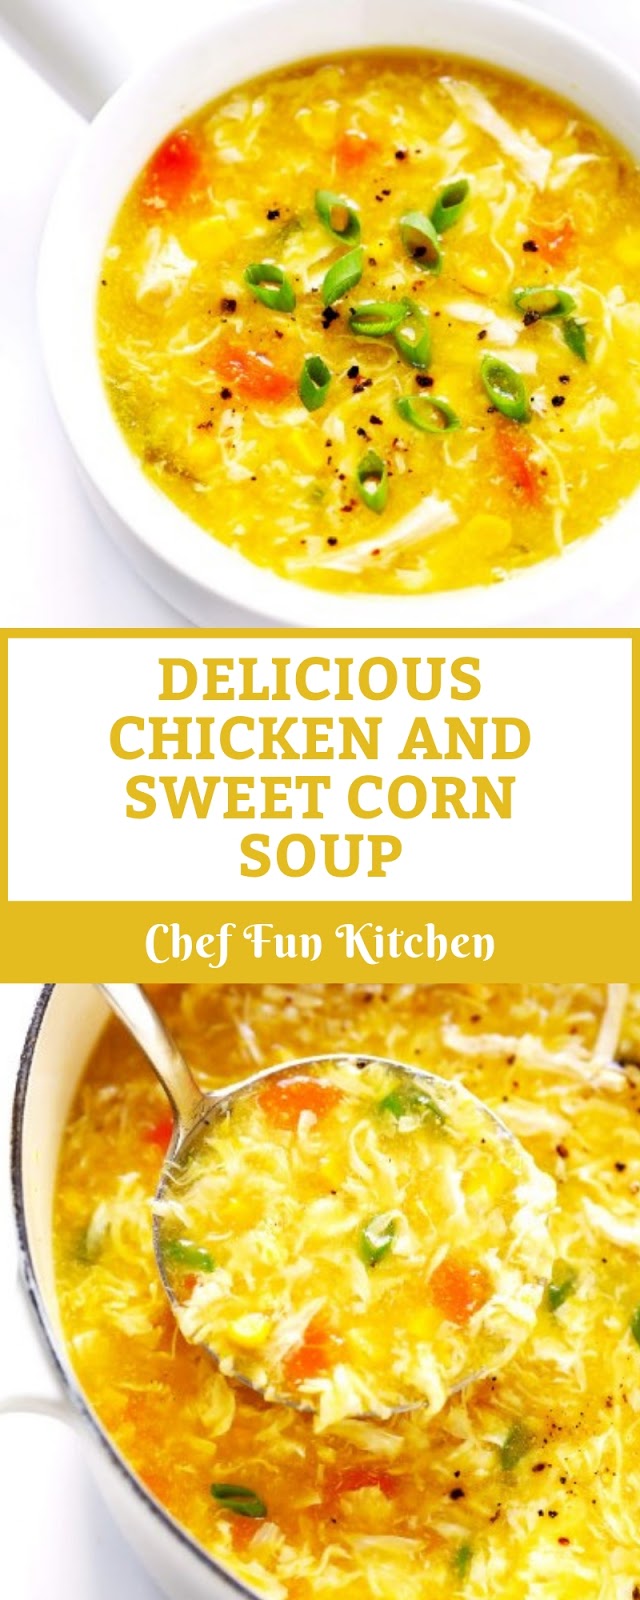 DELICIOUS CHICKEN AND SWEET CORN SOUP, DELICIOUS CHICKEN AND SWEET CORN SOUP RECIPE